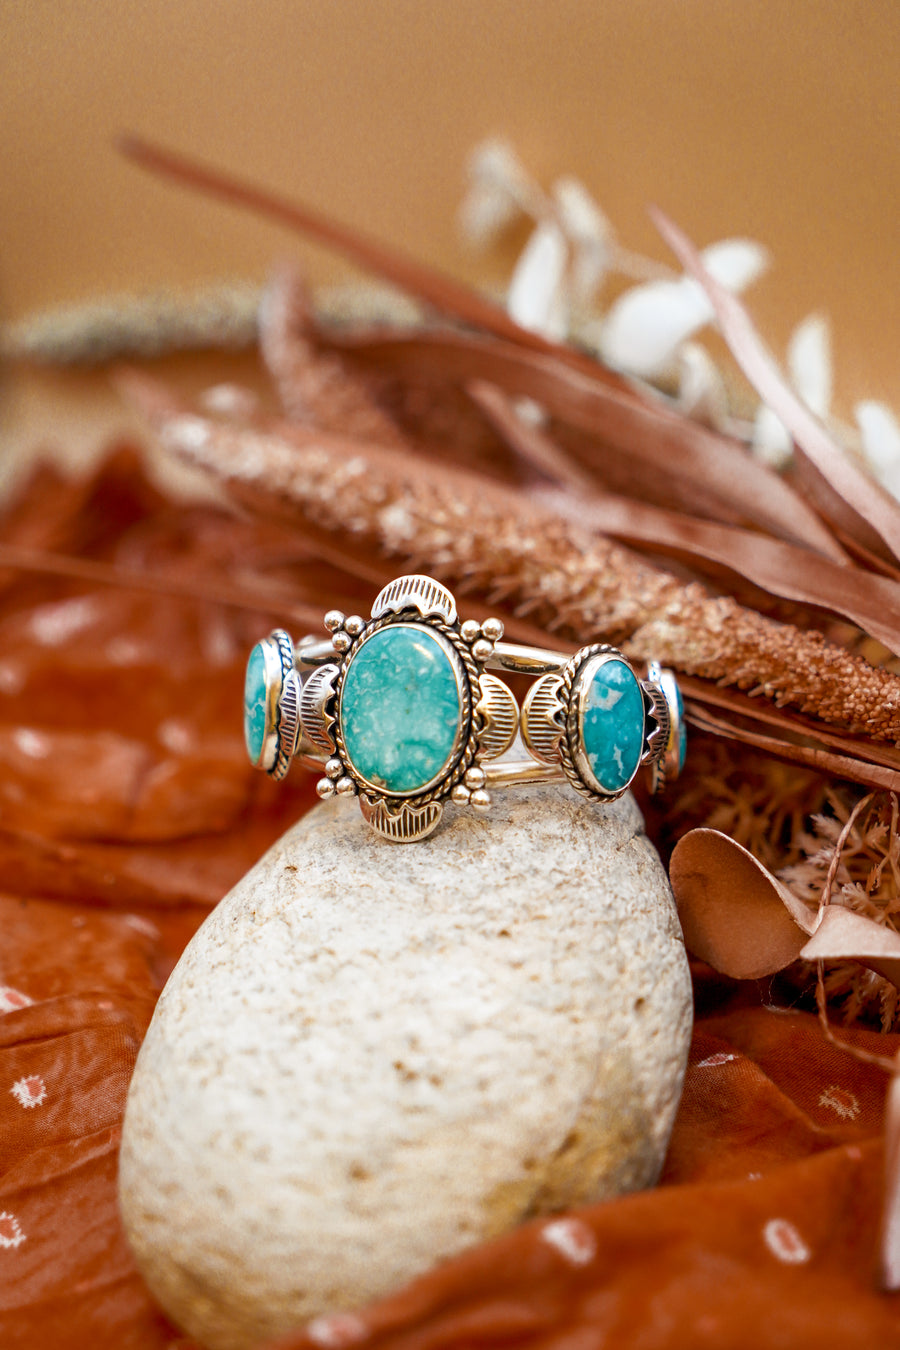 Statement Cuff in Whitewater Turquoise